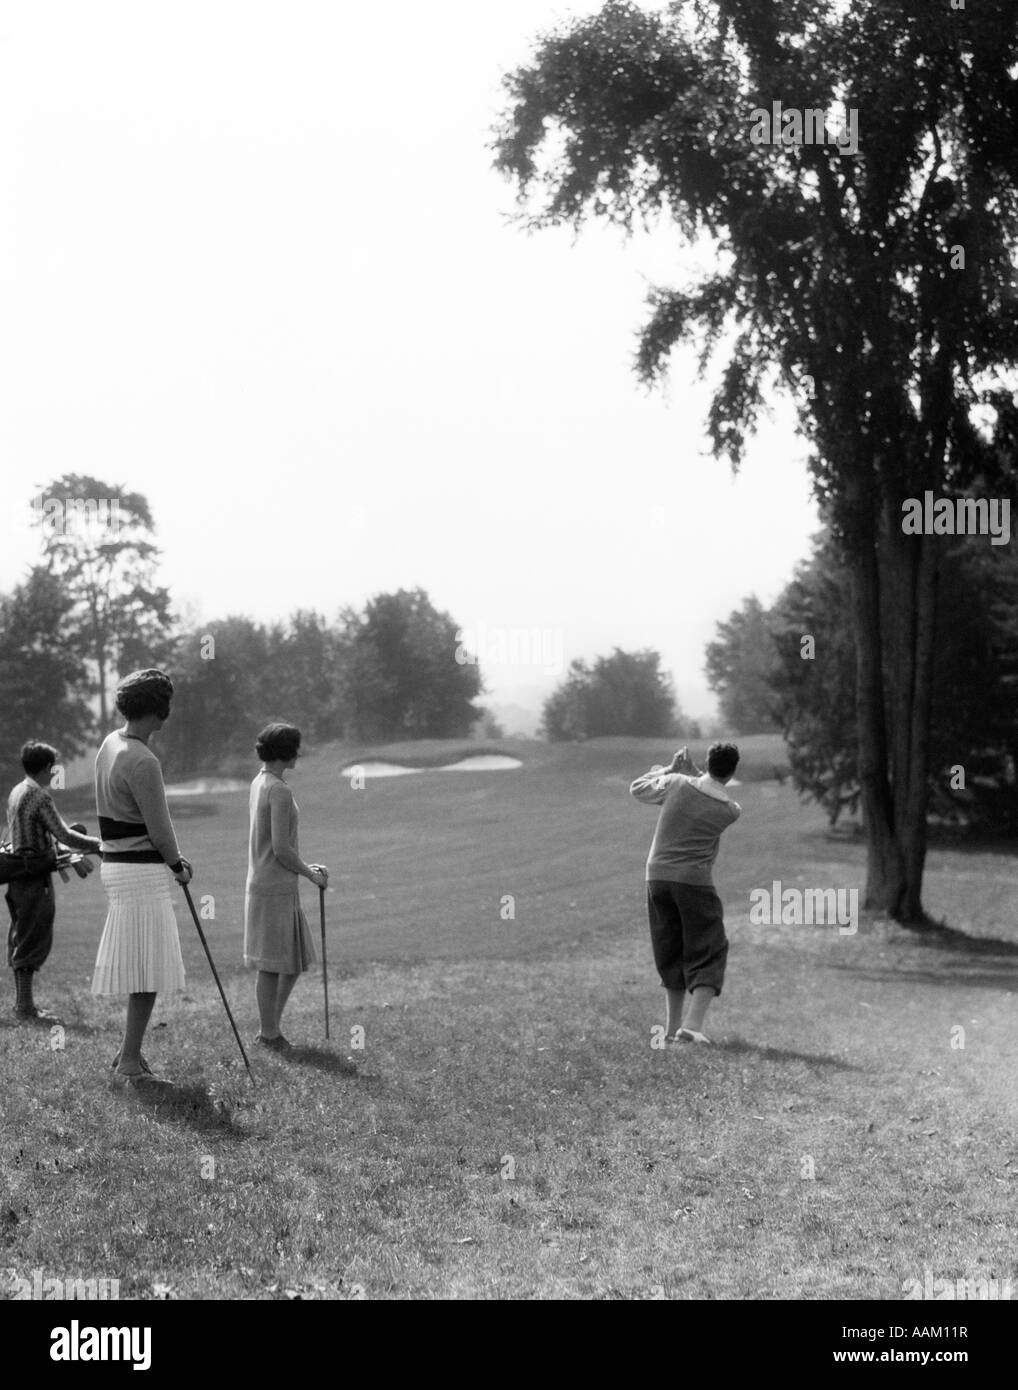 1920s 1930s MALE GOLFER IN THE ROUGH DRIVING DOWN FAIRWAY TWO WOMEN AND CADDY WATCHING Stock Photo